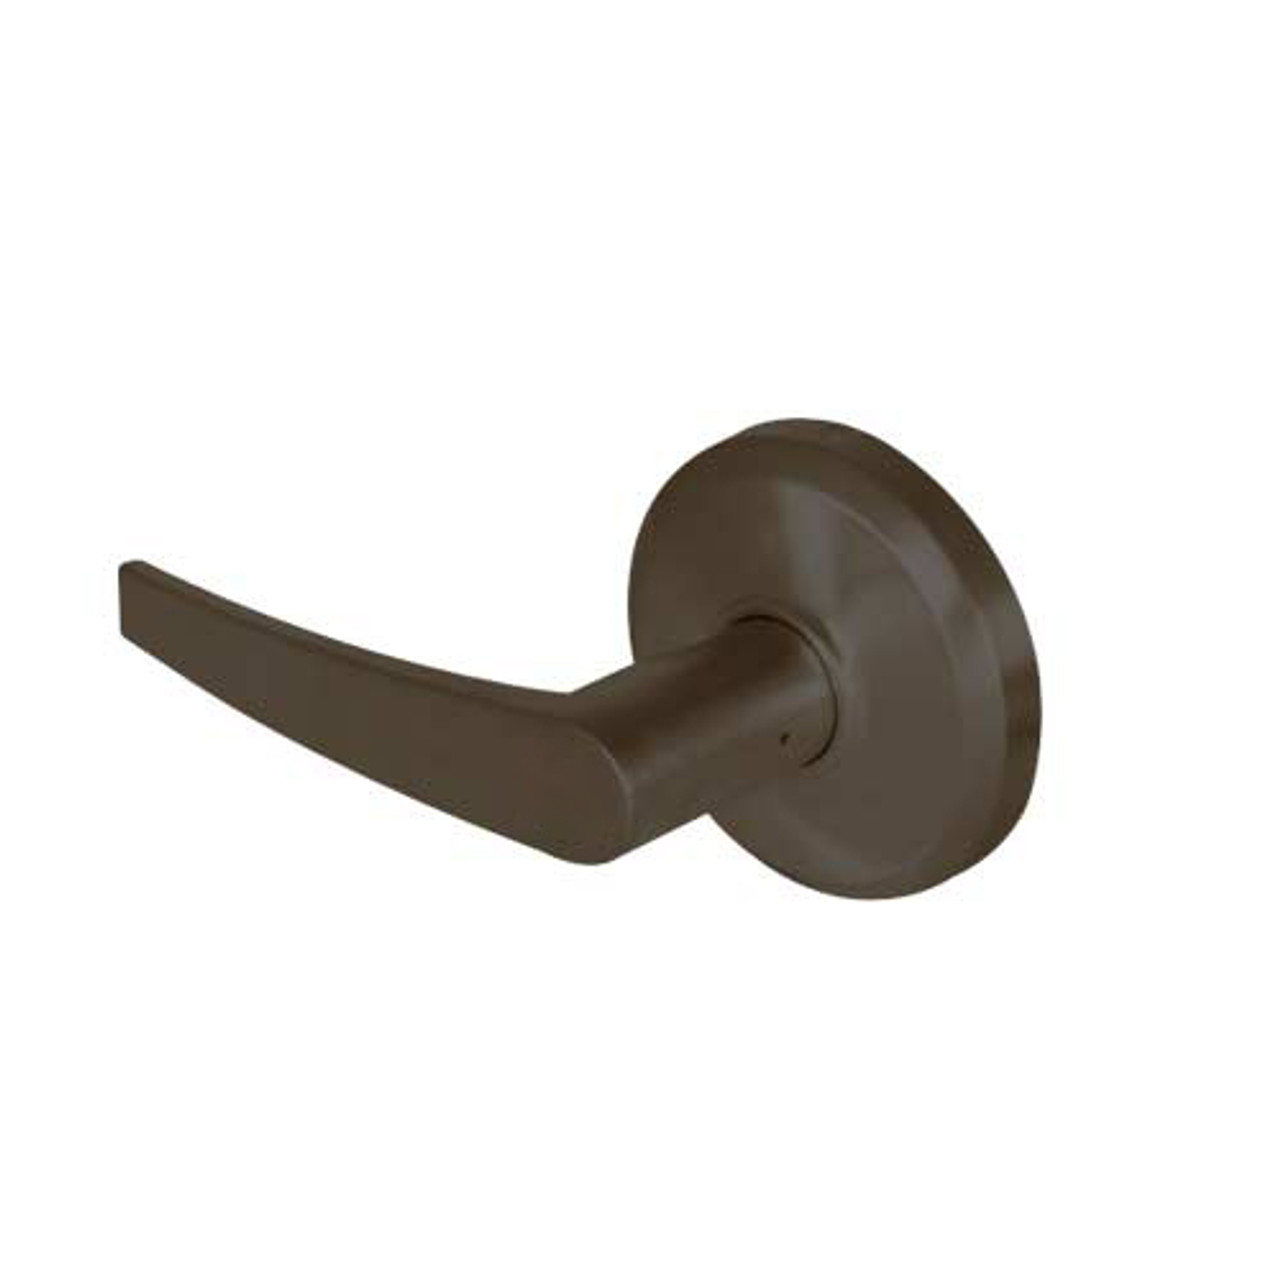 QCL235A613S5118F Stanley QCL200 Series Cylindrical Communicating Lock with Slate Lever in Oil Rubbed Bronze Finish